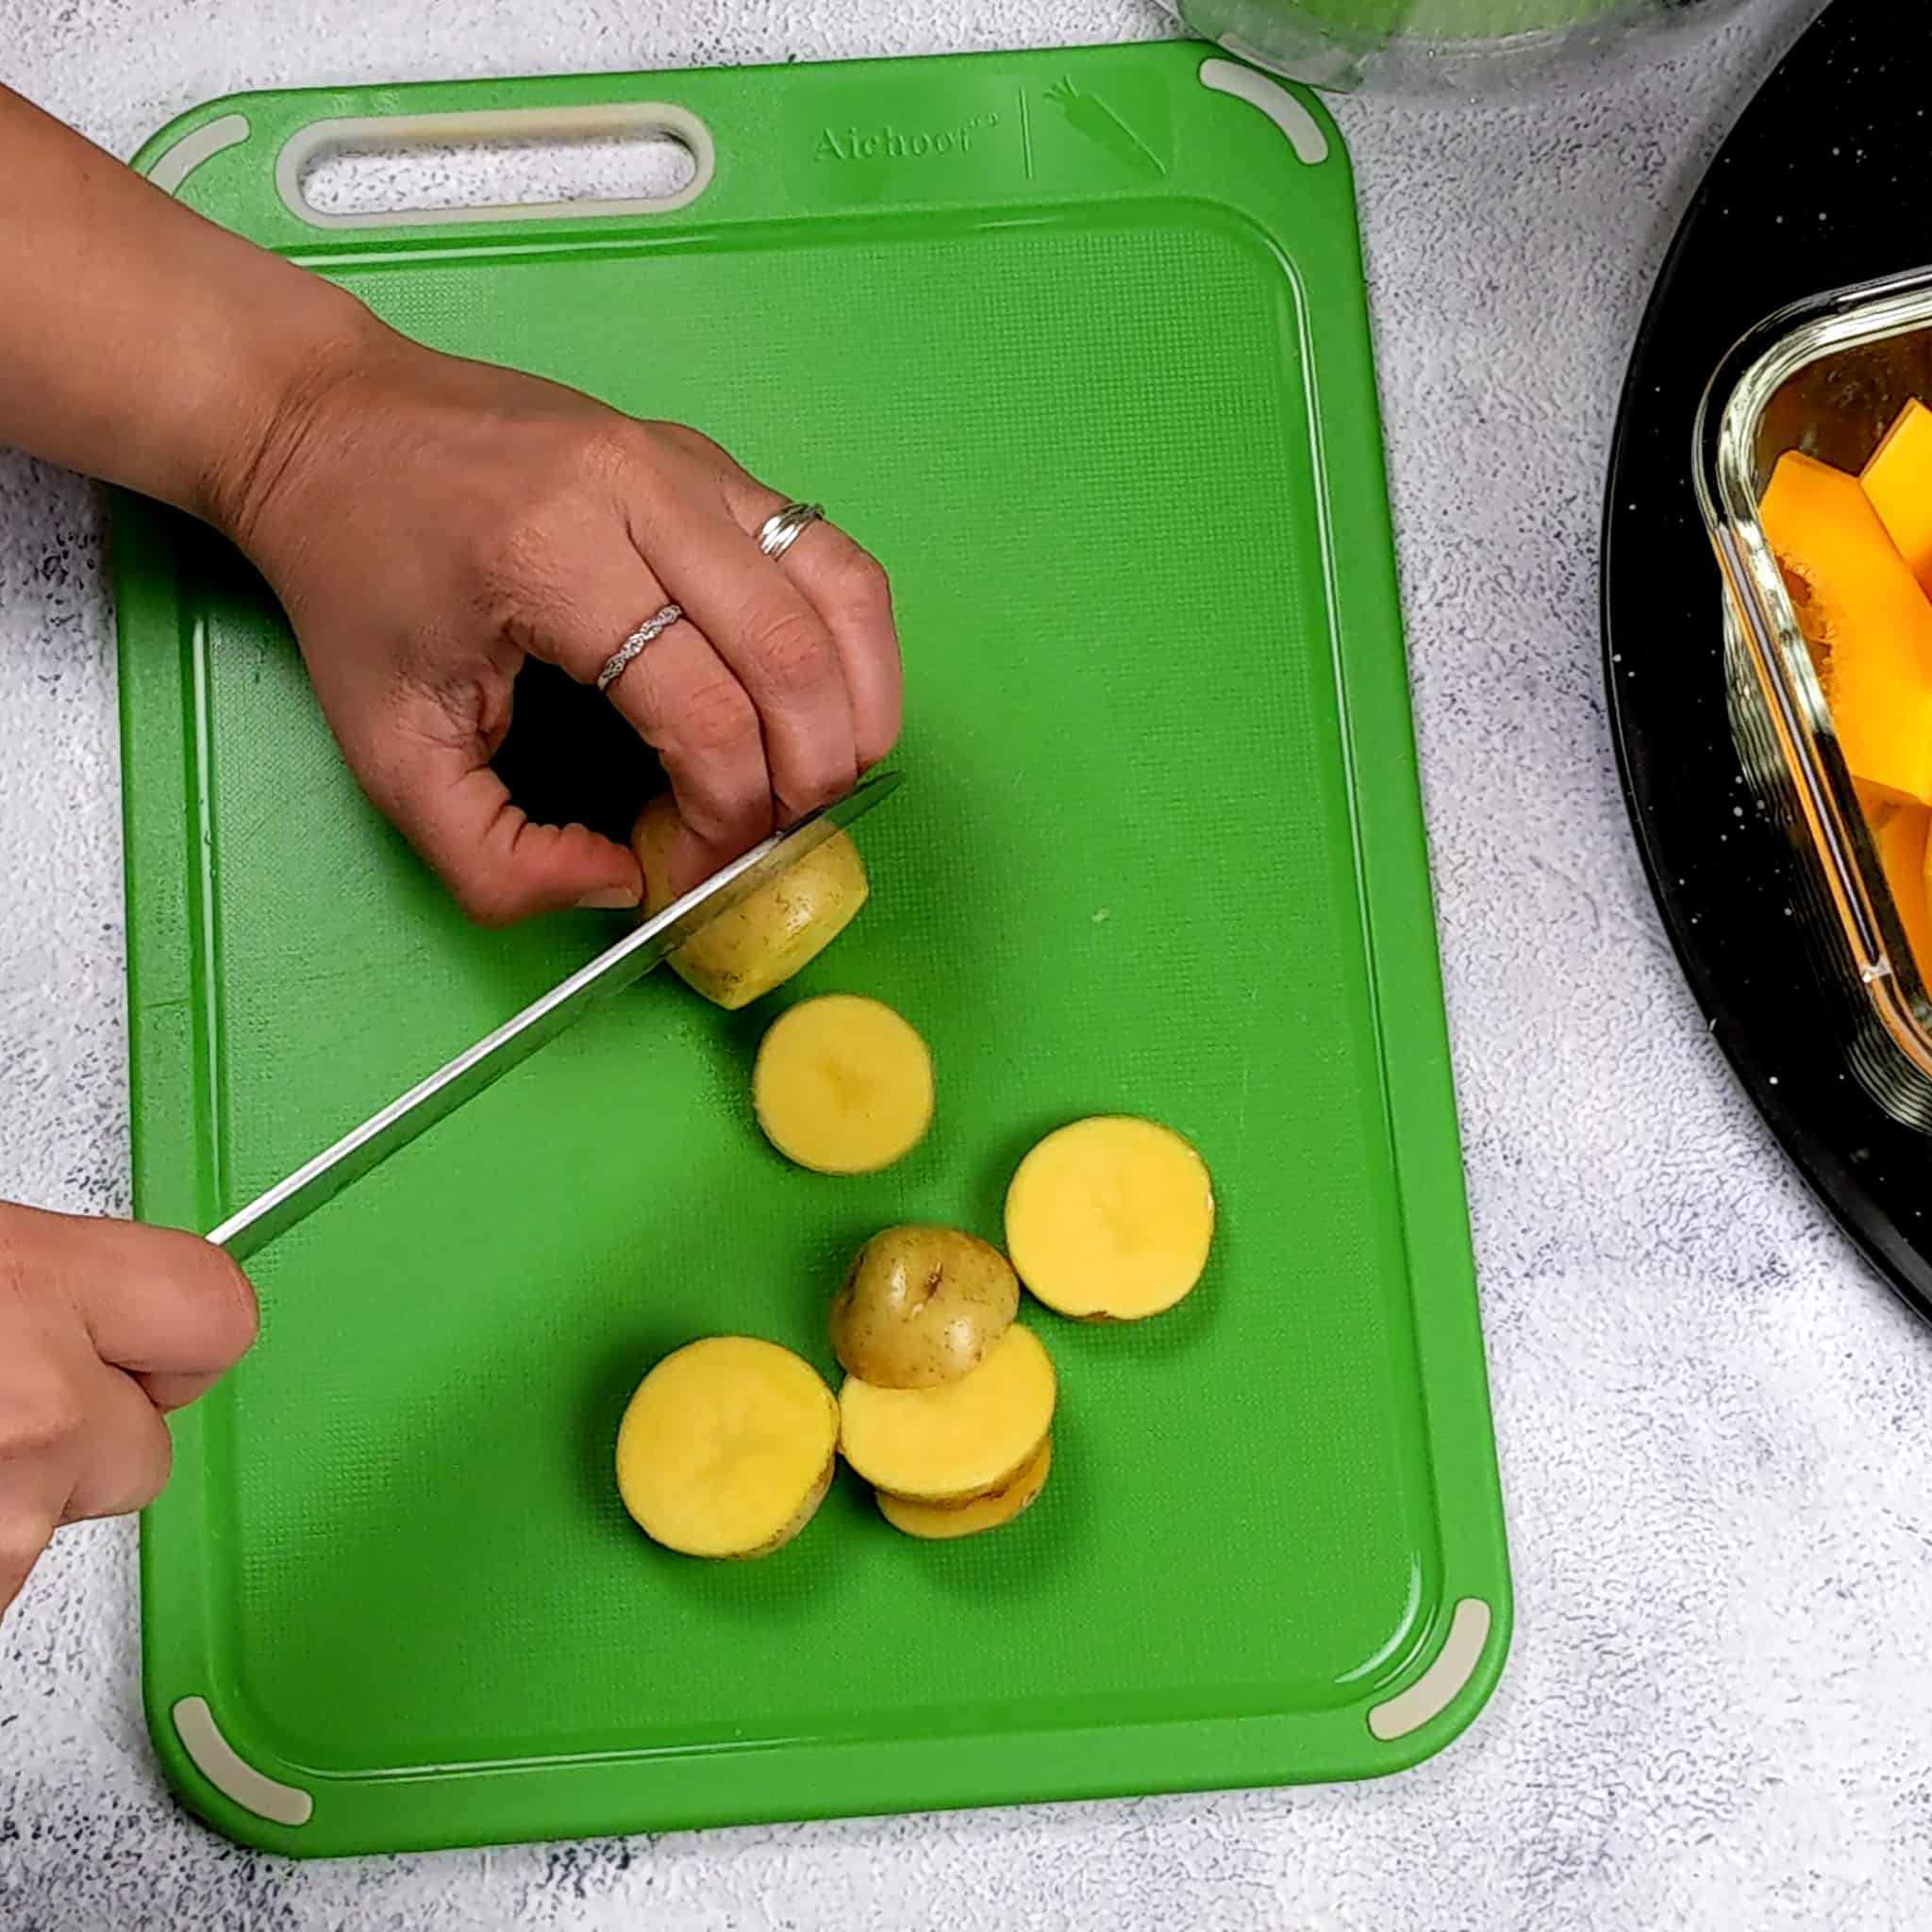 a baby Dutch yellow potato being cut into thick slices on a small color coded cutting board with a knife